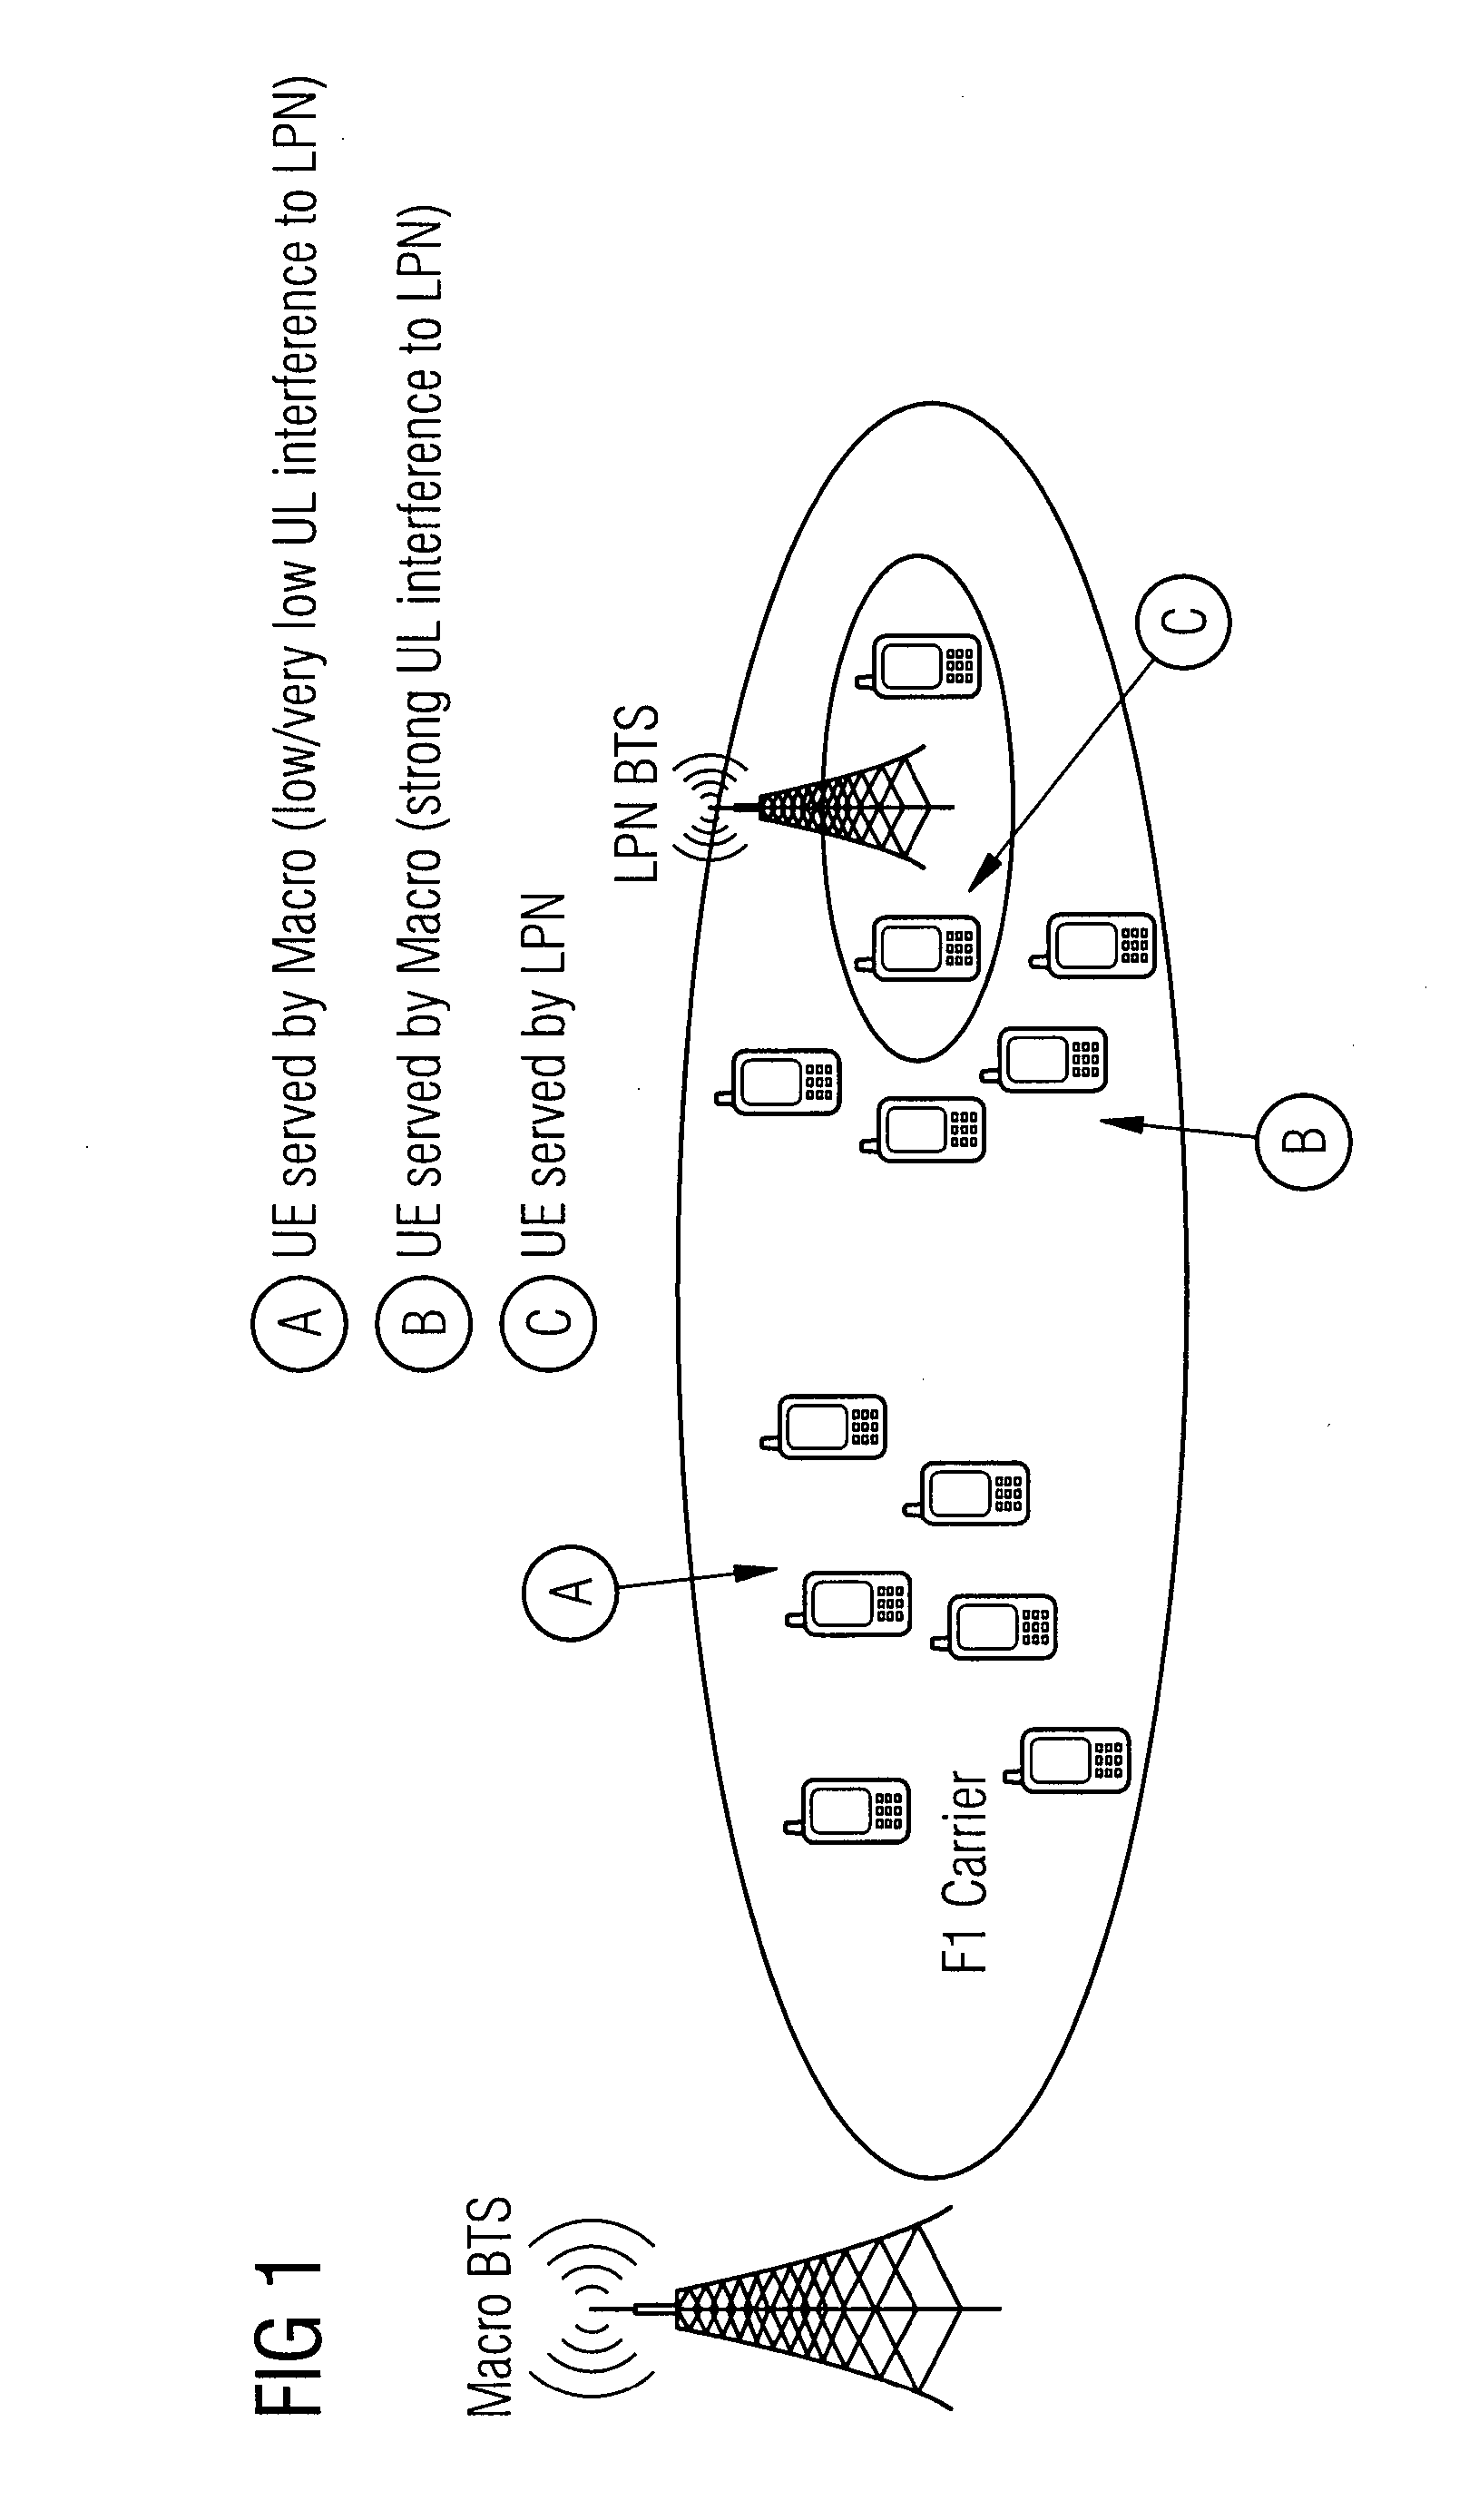 Interference Mitigation in Strong Imbalance Zone